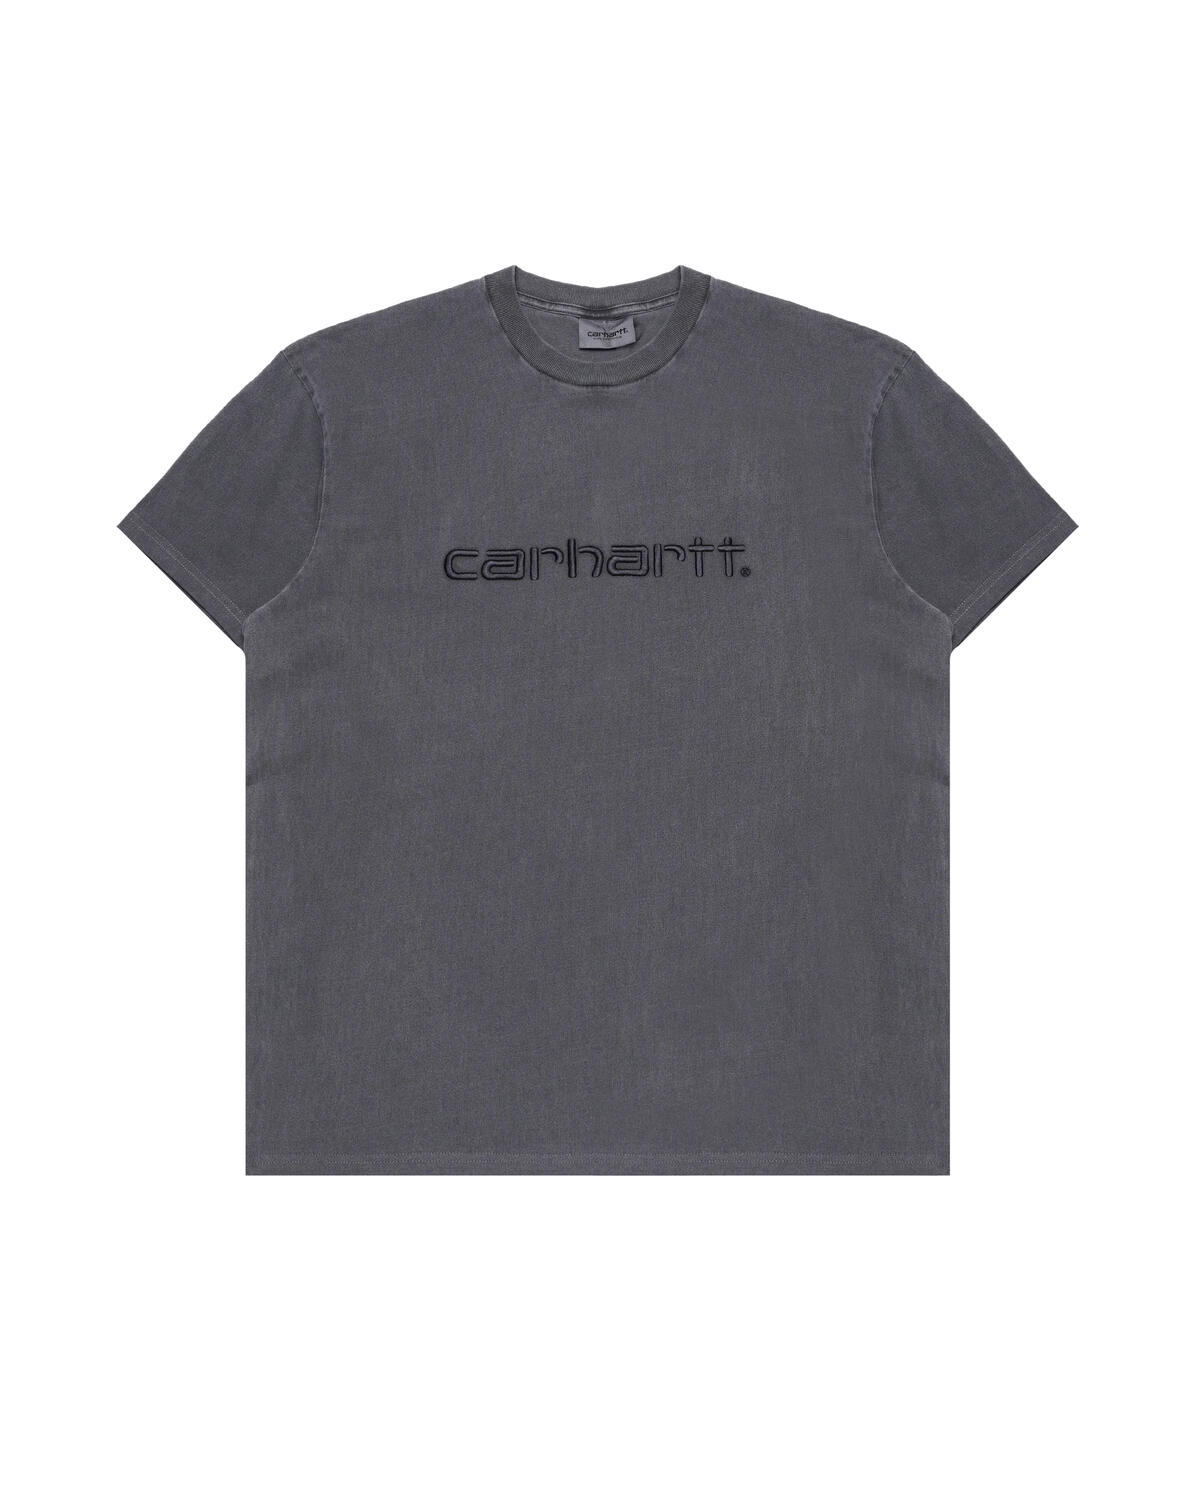 Carhartt WIP S/S Duster T-Shirt | I030110.89GD | AFEW STORE